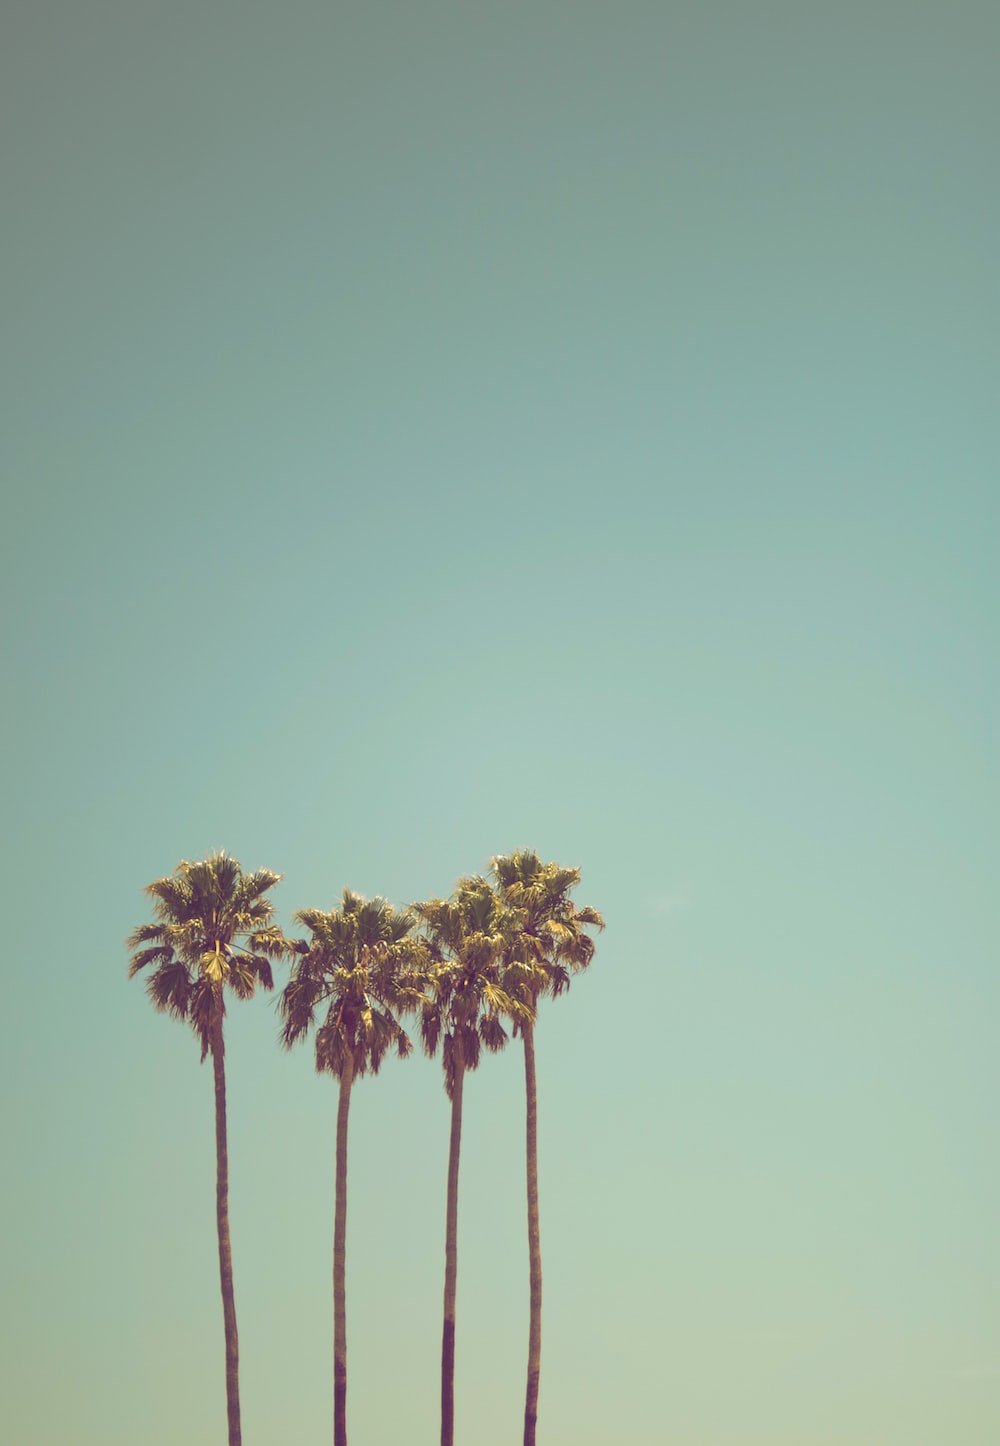 California Palm Trees Picture. Download Free Image